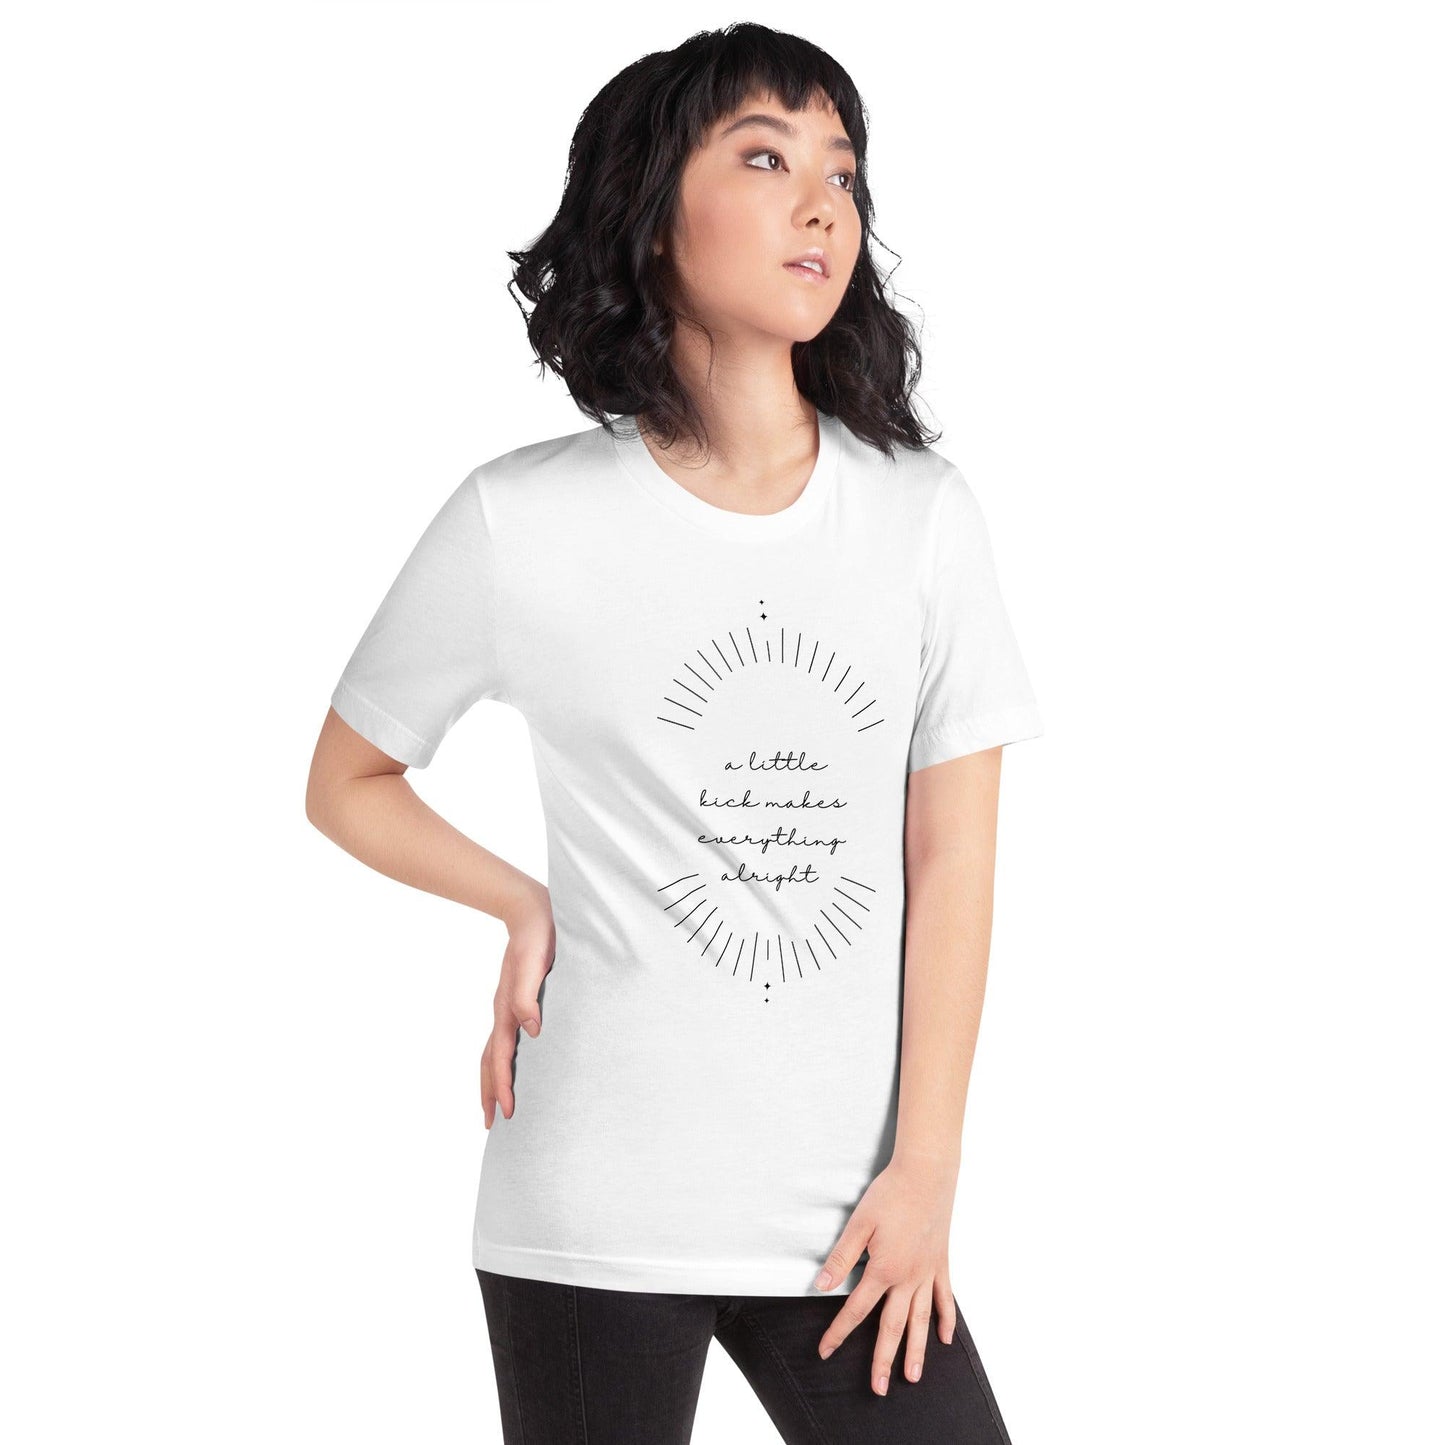 Everything Alright Mommy's Premium Short-Sleeve Women's T-Shirt - Affirm Effect